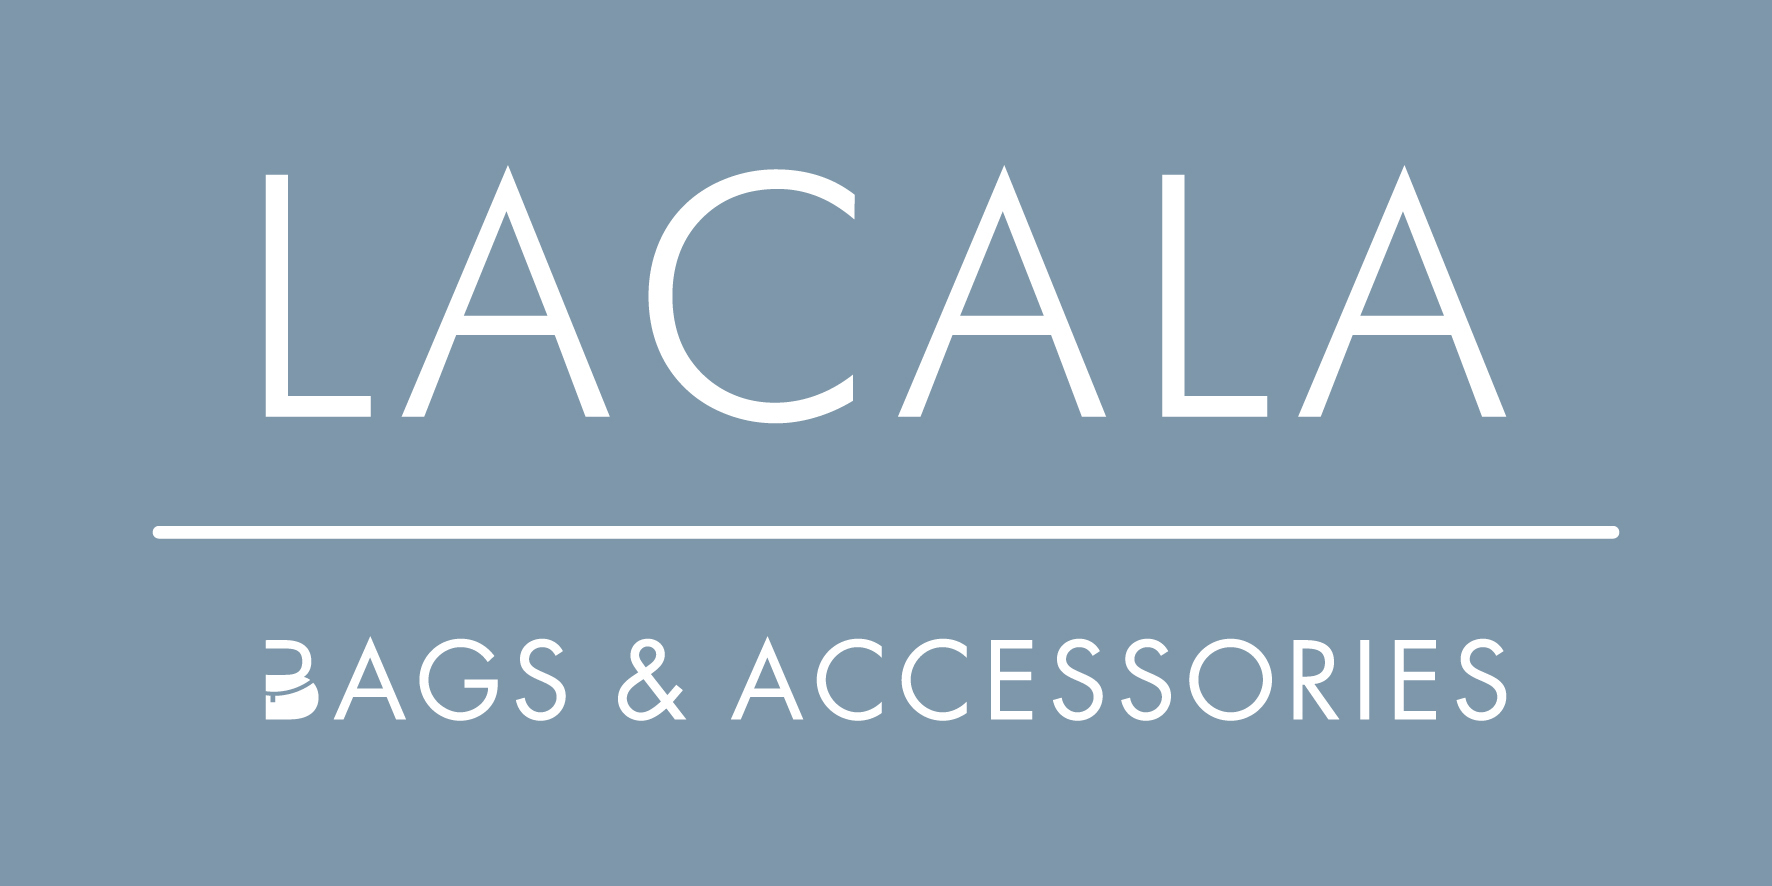 LACALA BAGS & ACCESSORIES